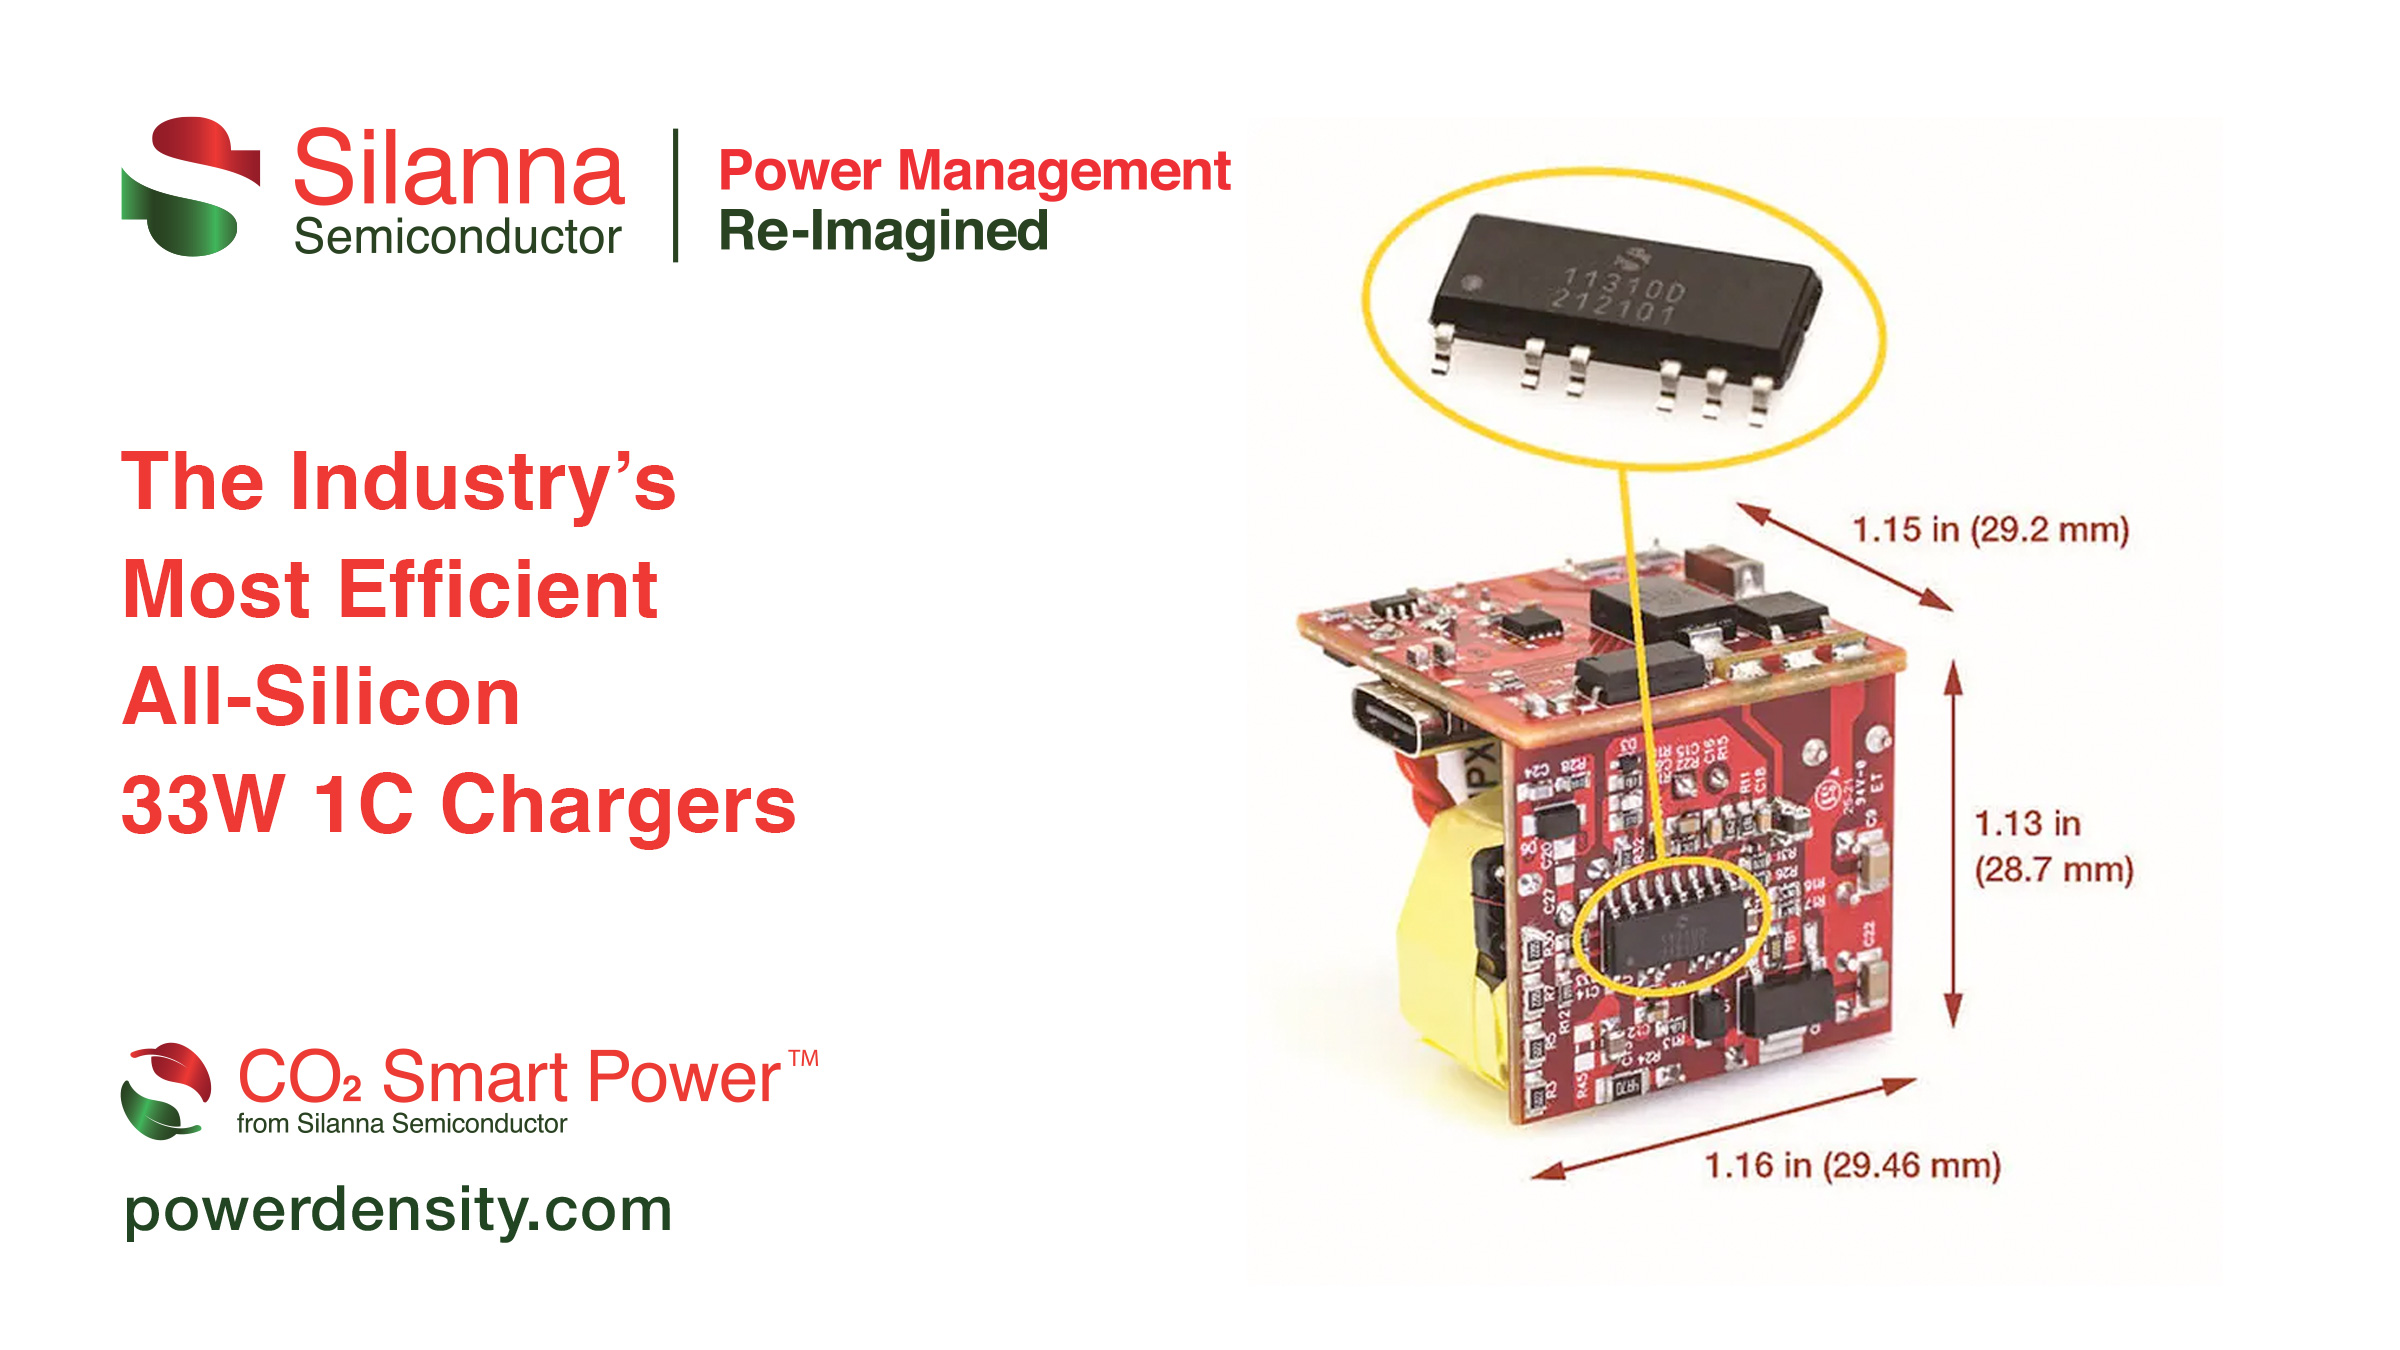 Reference Design for the Industry's Most Efficient All-Silicon 33W 1C Chargers